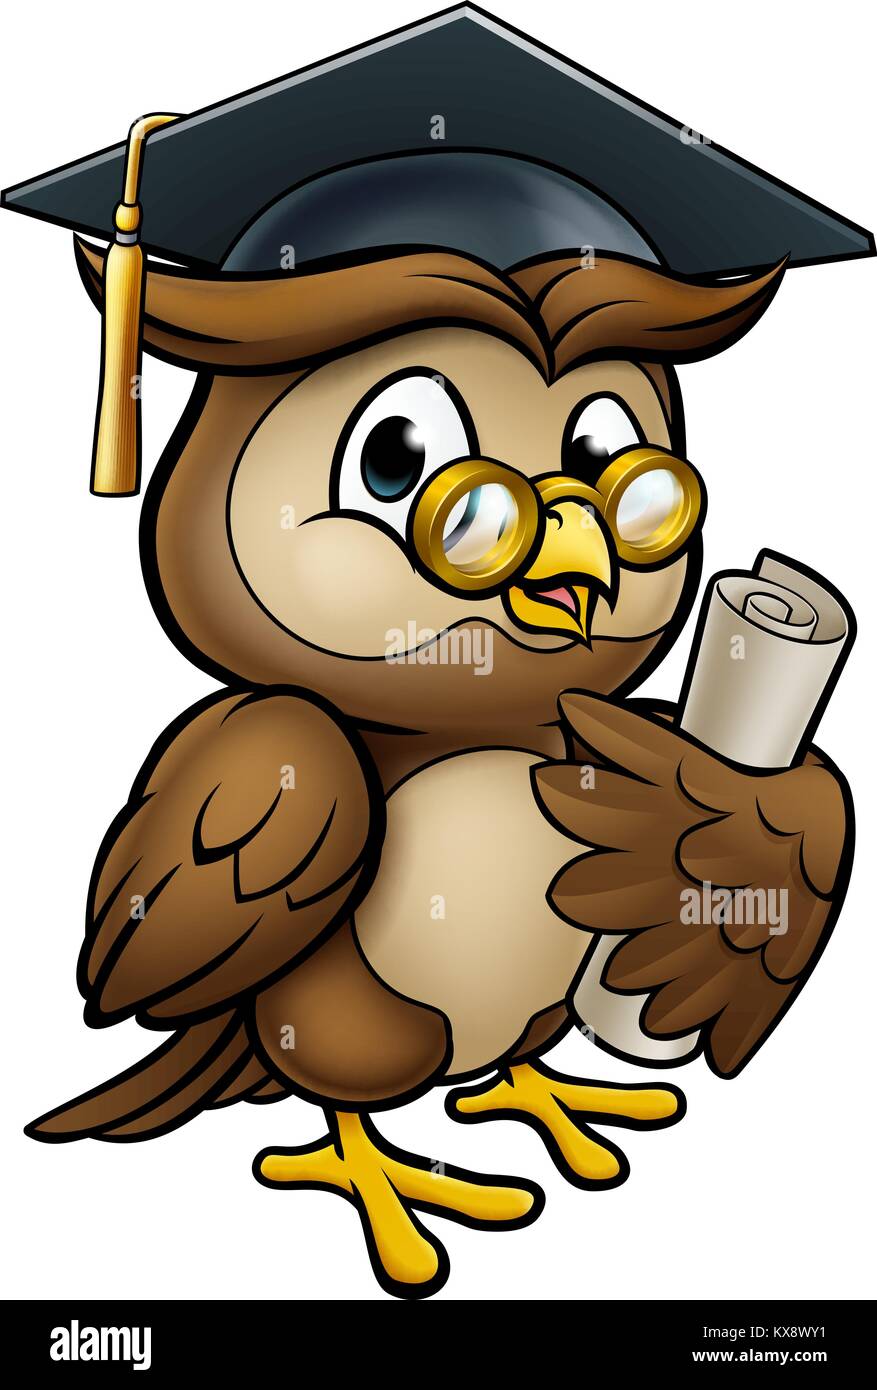 Wise Owl Graduate Character Stock Vector